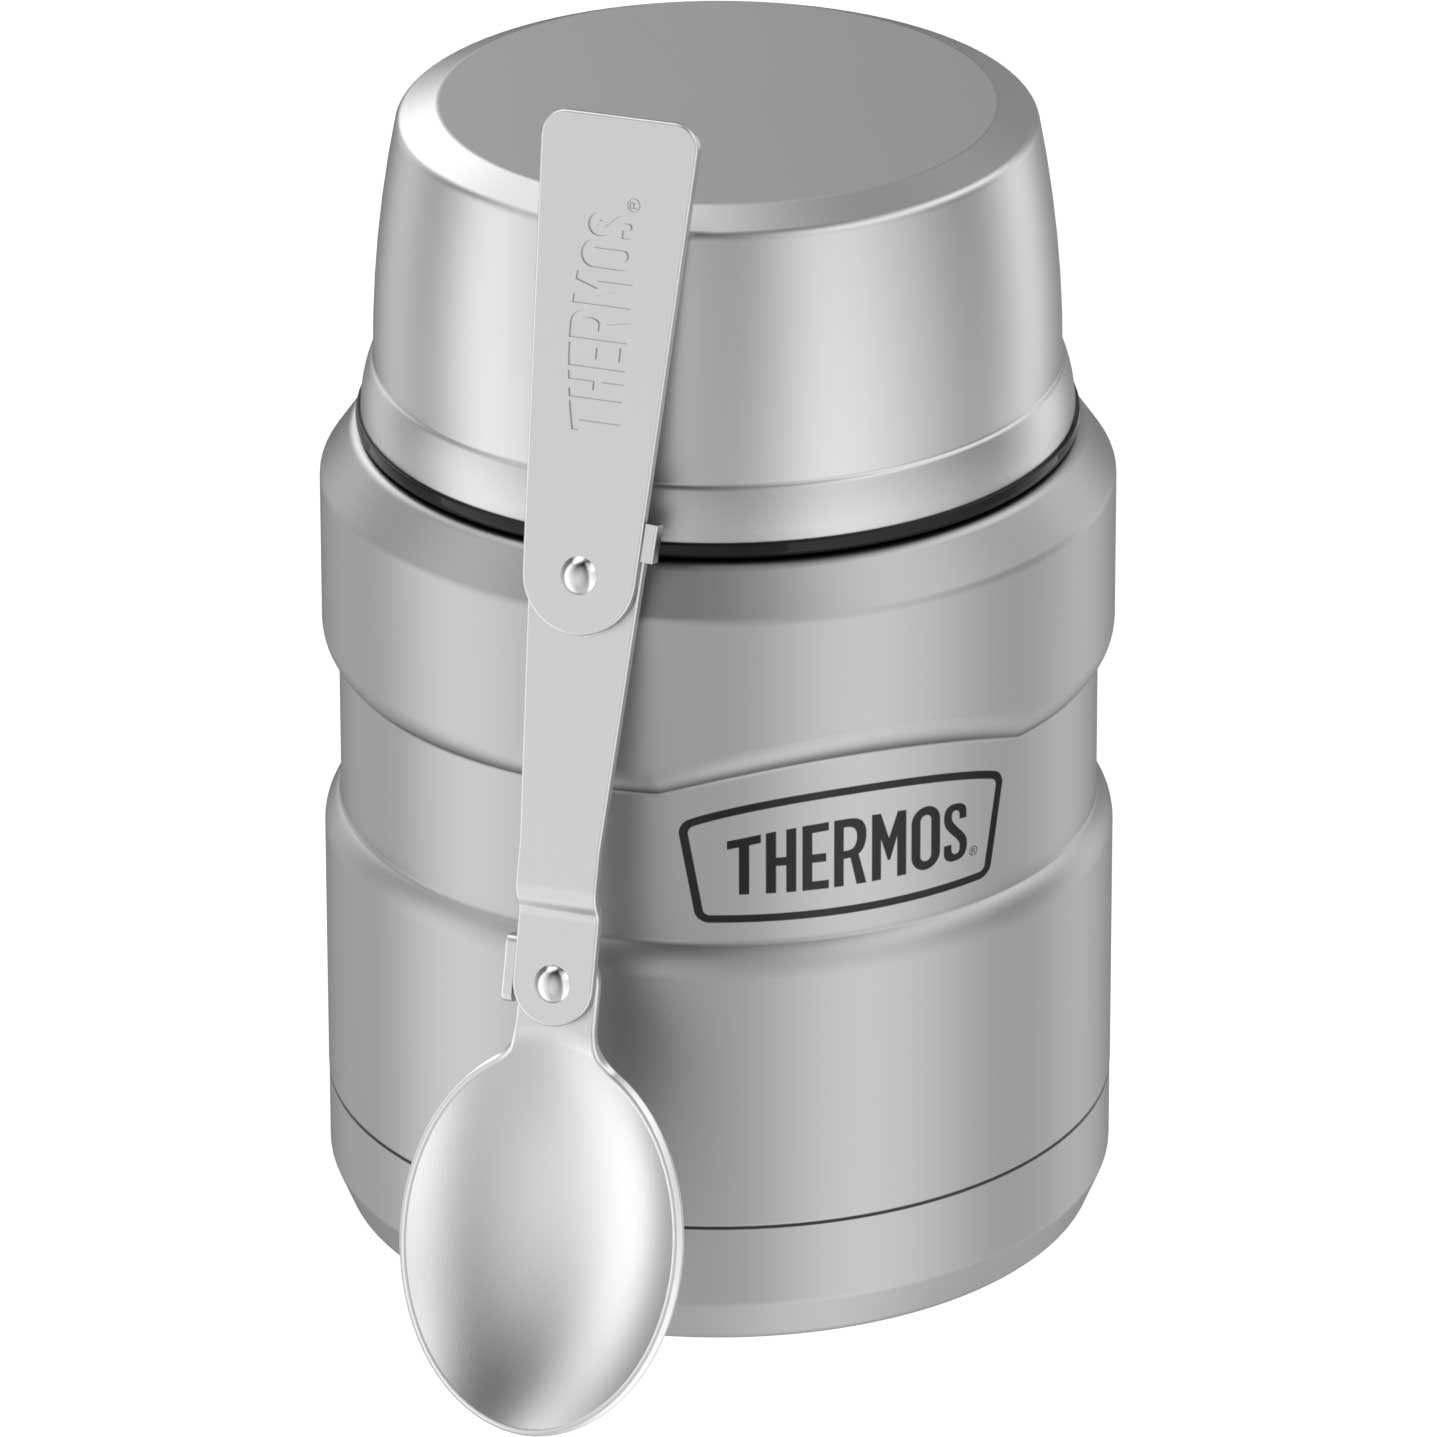 Thermos 16oz Stainless King Food Jar with Spoon - Matte Rose